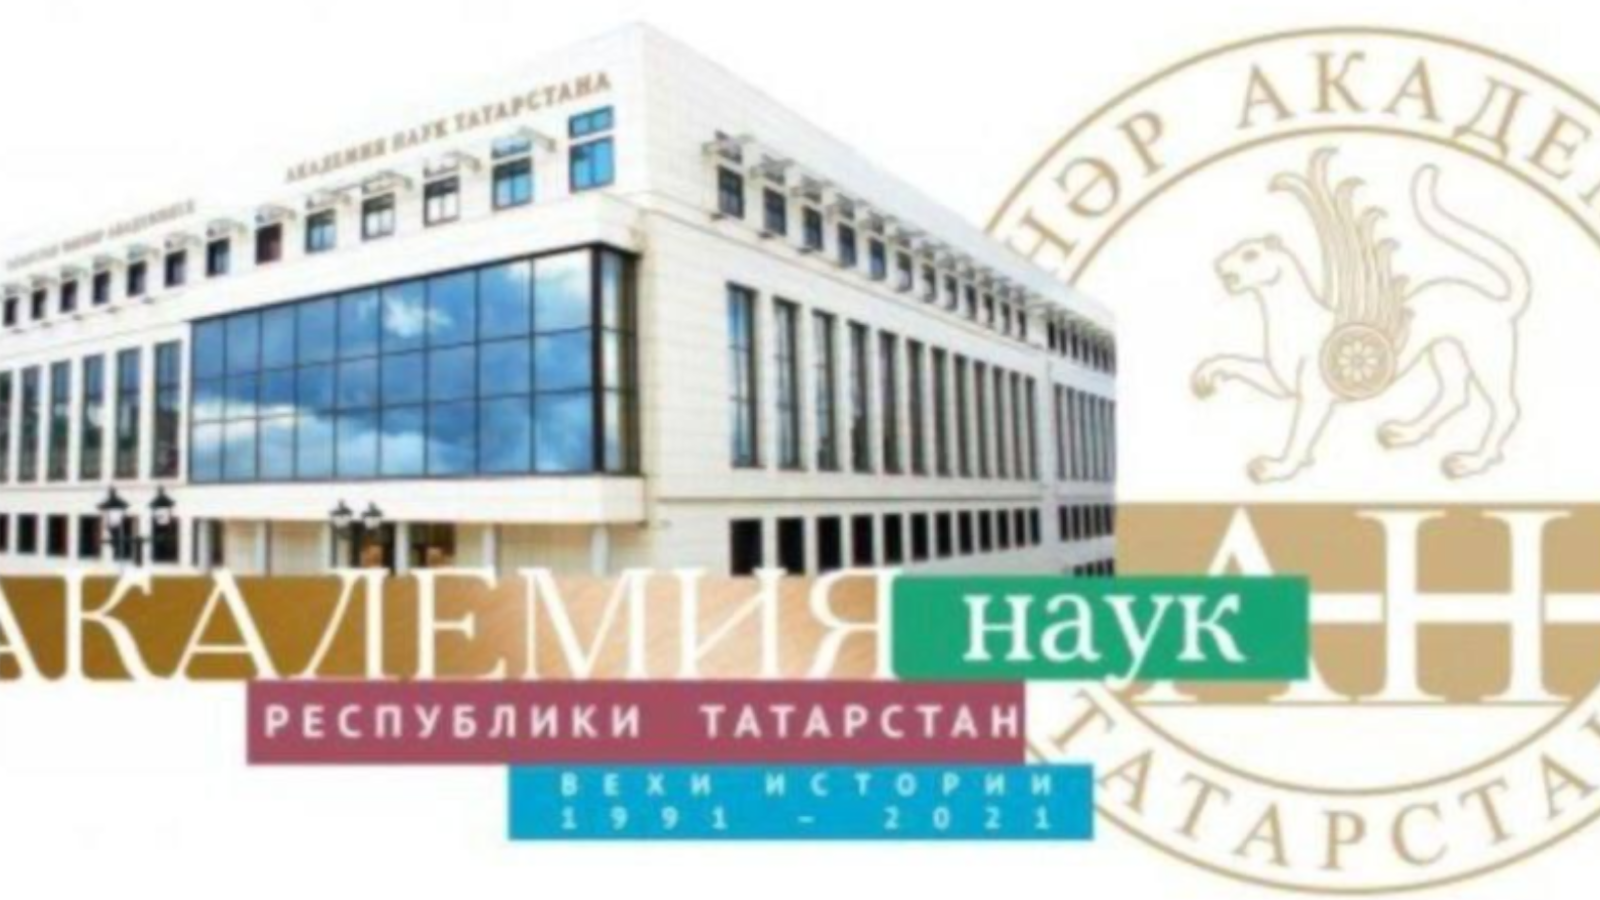 On September 30, 1991, the Academy of Sciences of Tatarstan was created